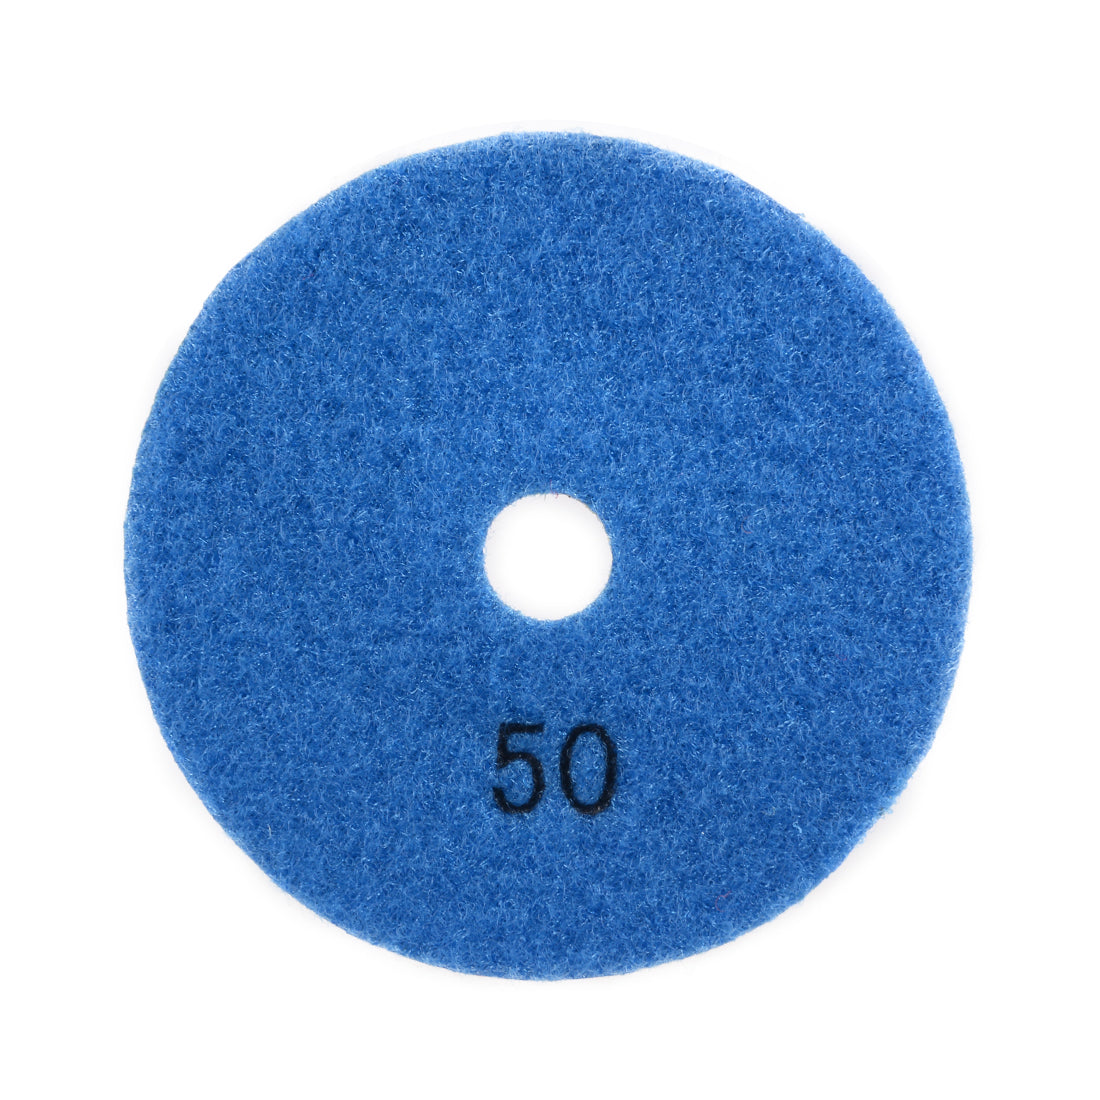 uxcell Uxcell Diamond Polishing Sanding Grinding Pads Discs 4 Inch Grit 50 10 Pcs for Granite Concrete Stone Marble